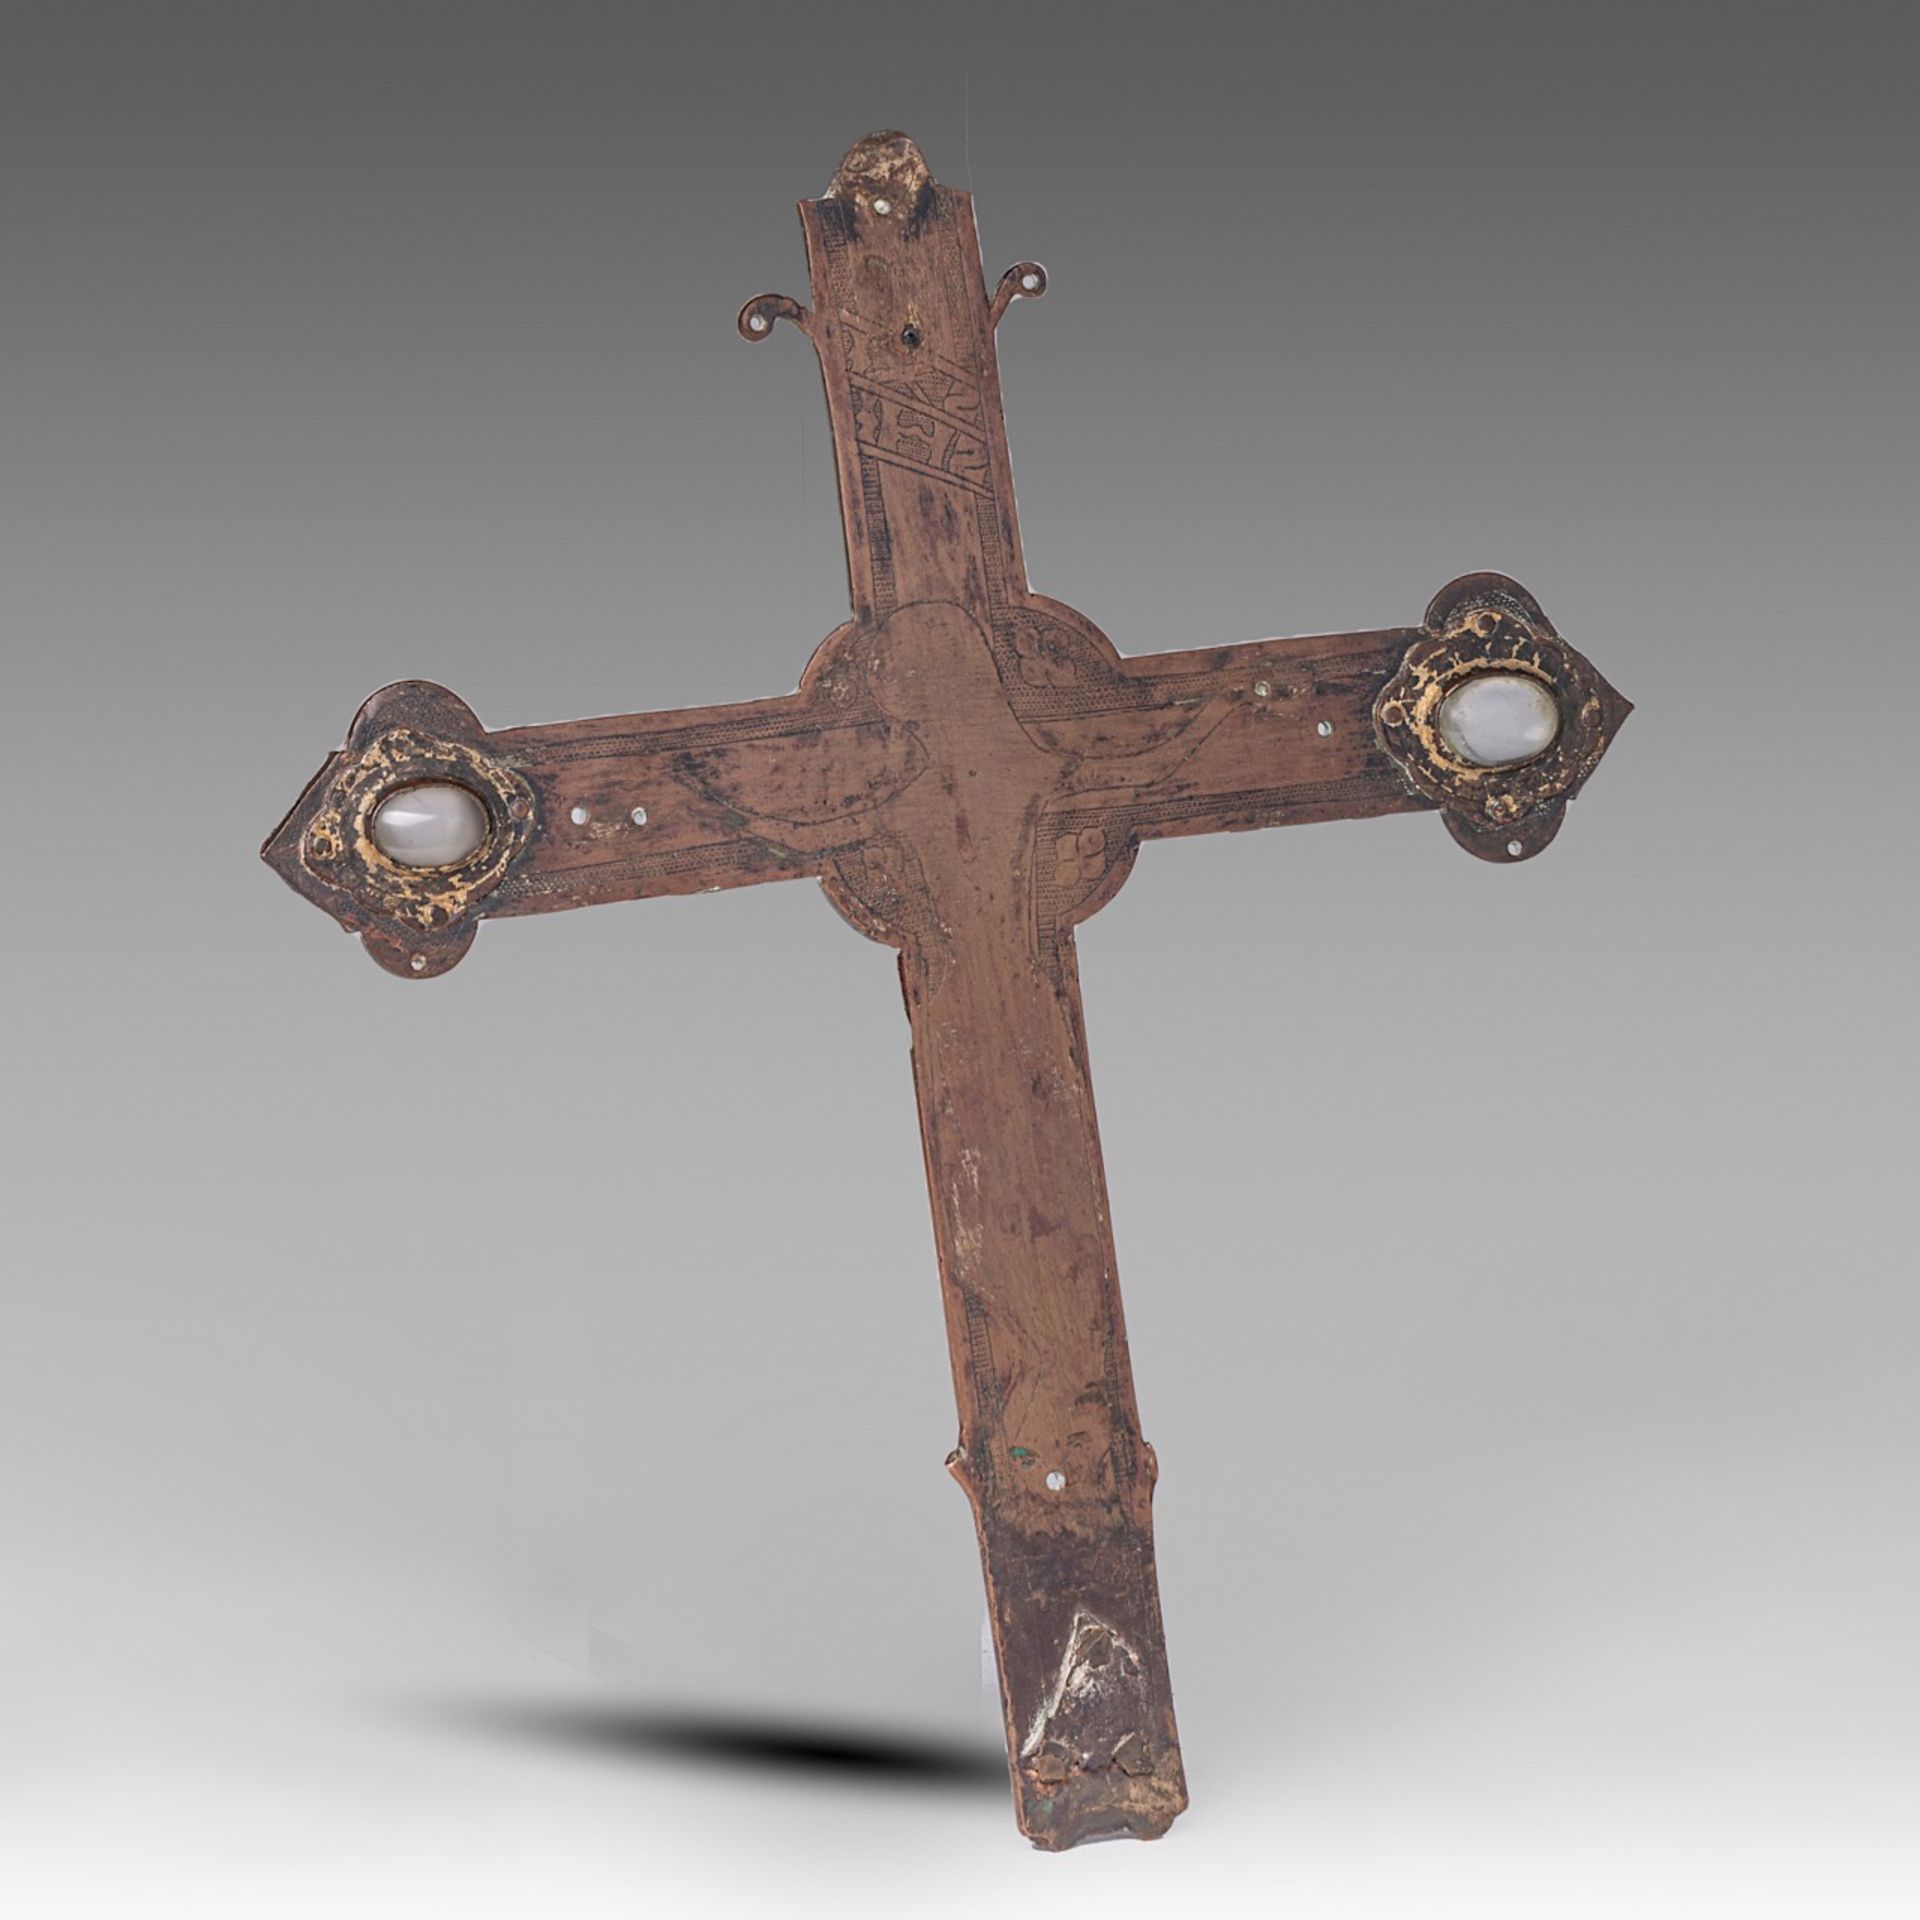 A 14thC copper engraved processional cross, with traces of gilt, H 35,5 cm - Image 4 of 5